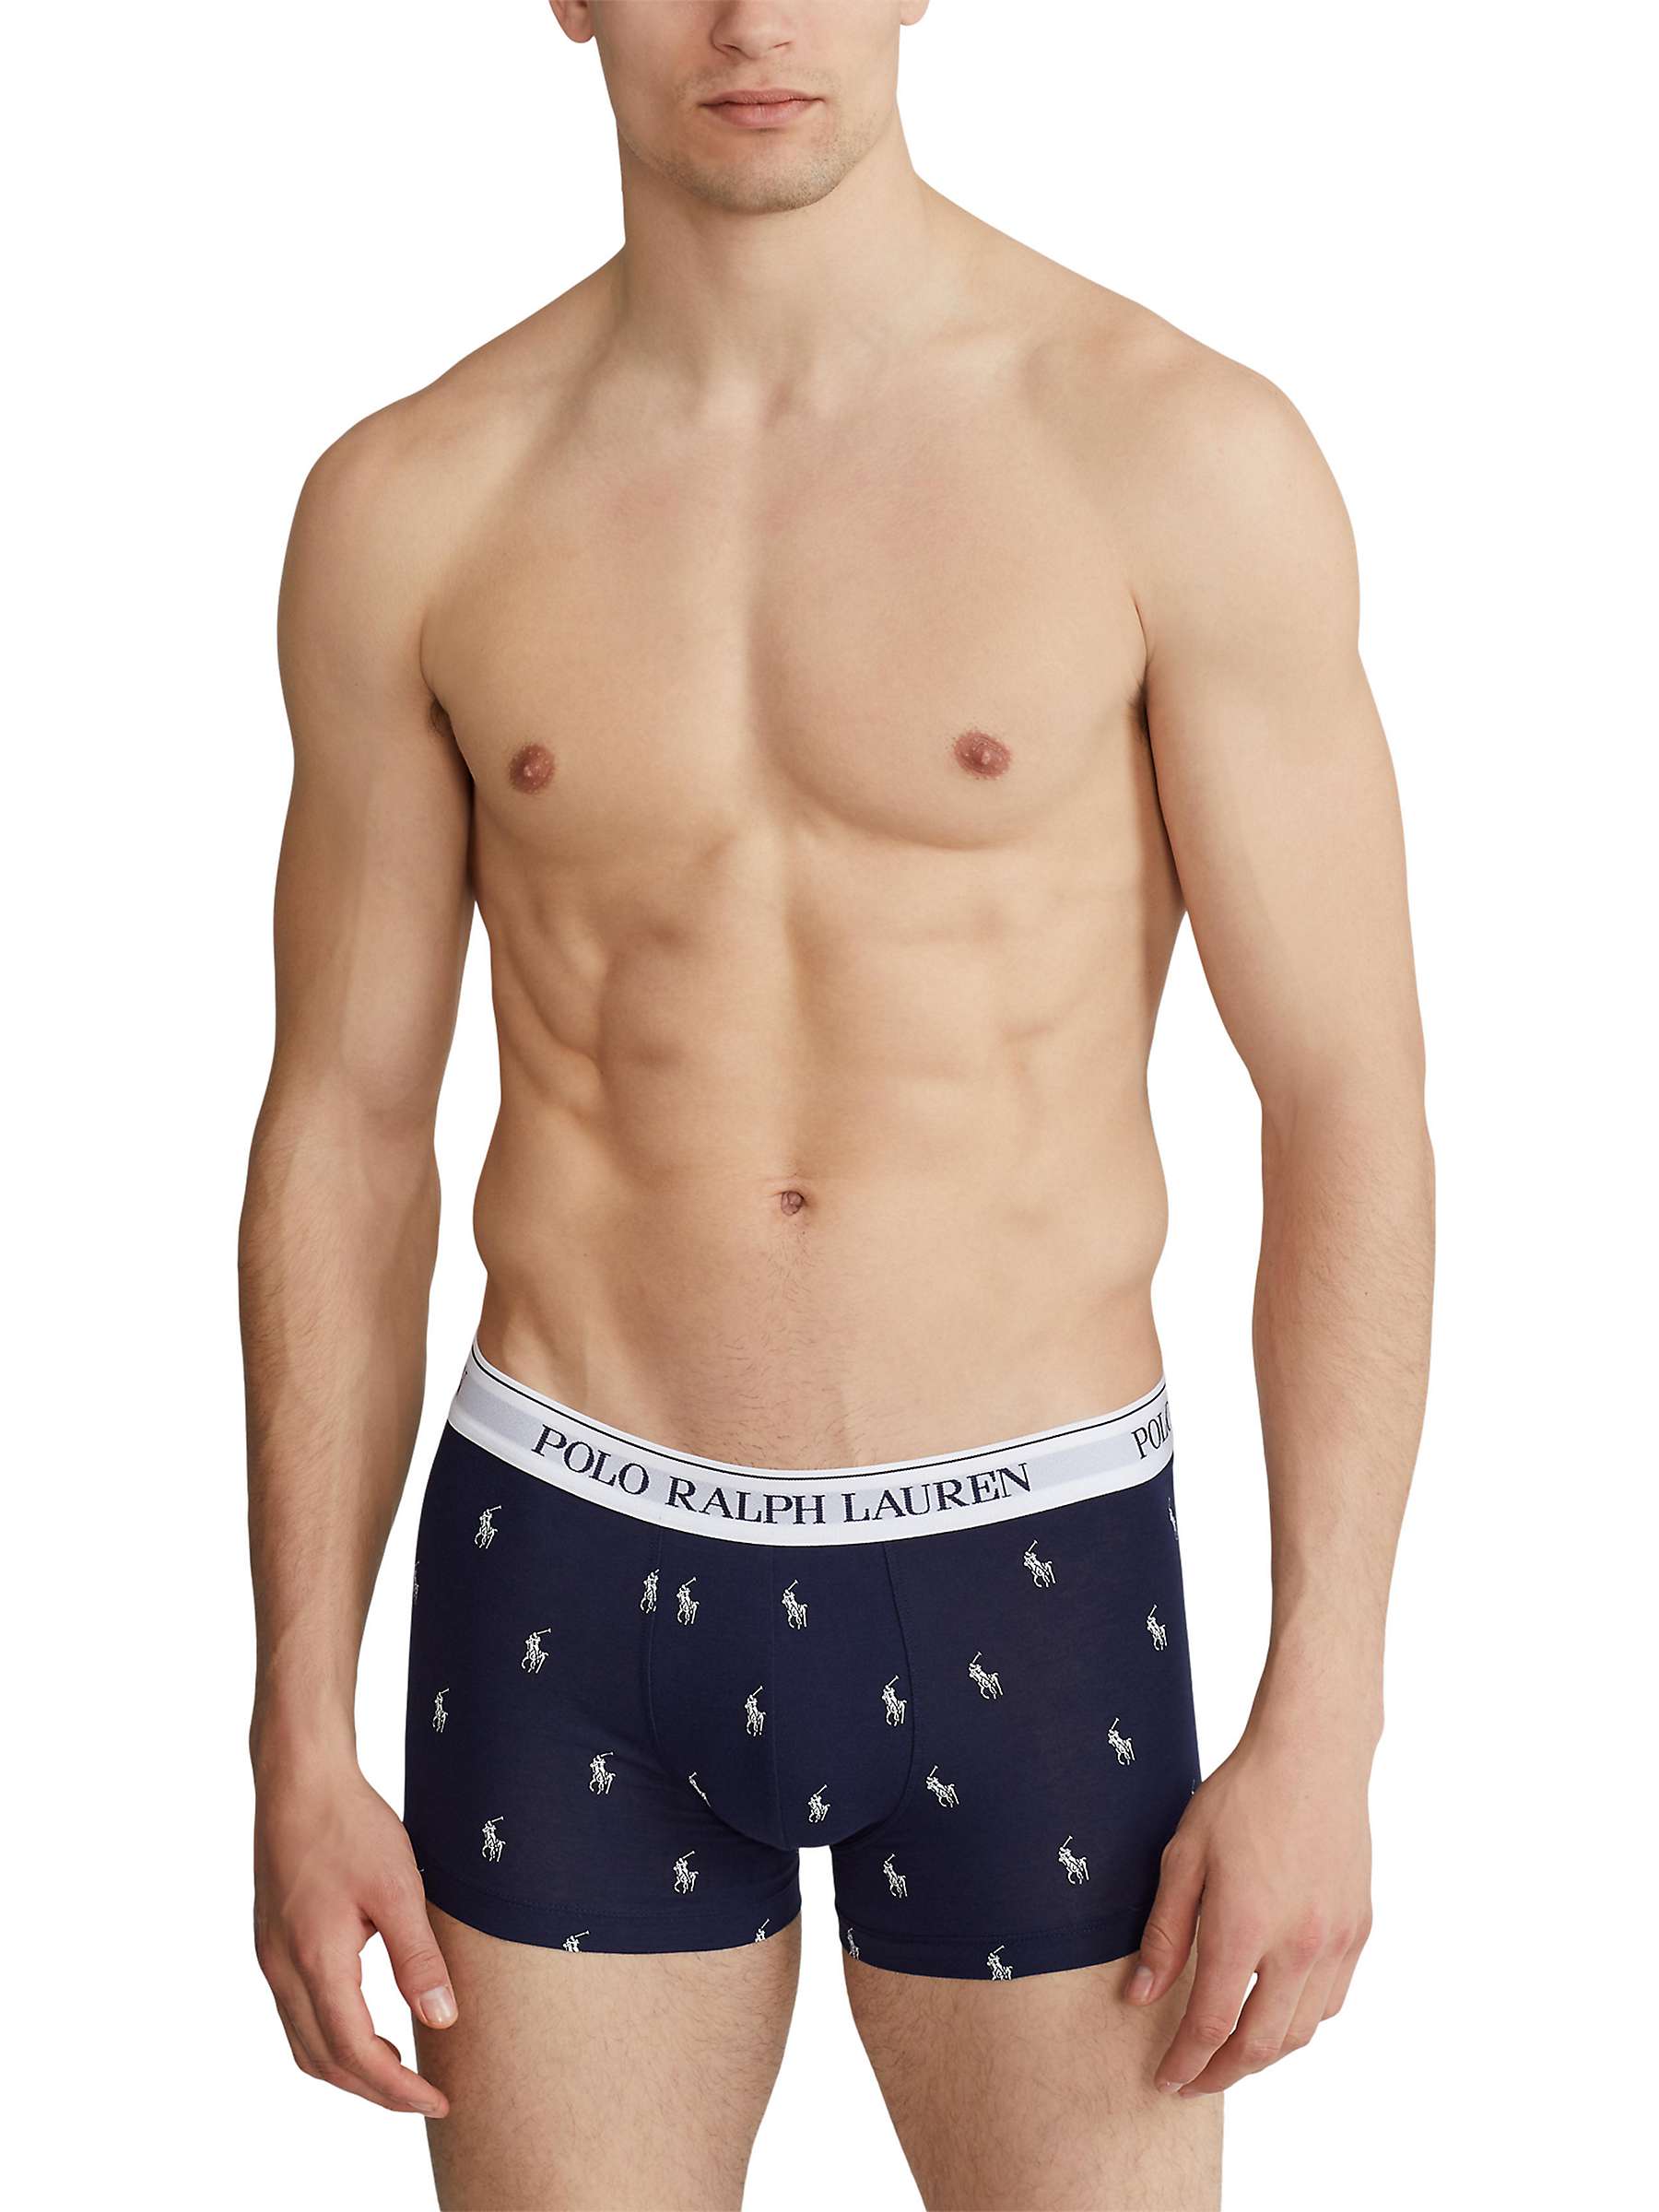 Buy Polo Ralph Lauren Stretch Cotton Trunks, Pack of 3 Online at johnlewis.com